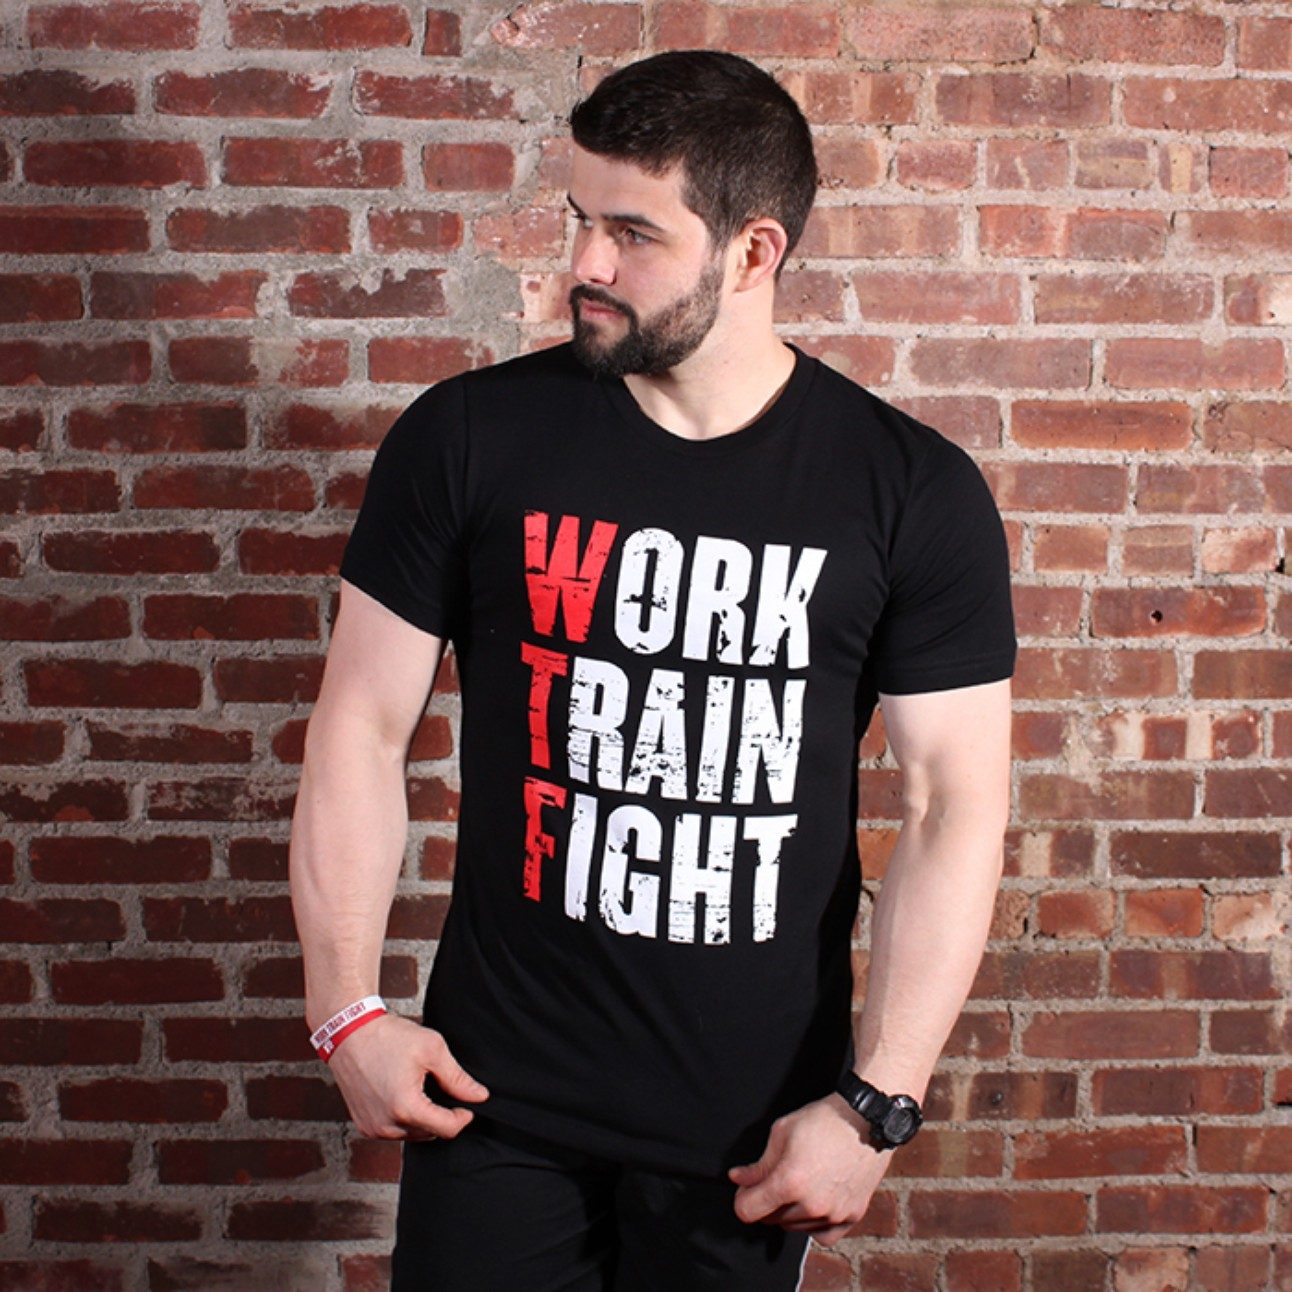 Mark Sayer, fitness trainer, wearing a shirt that says: Work Train Fight